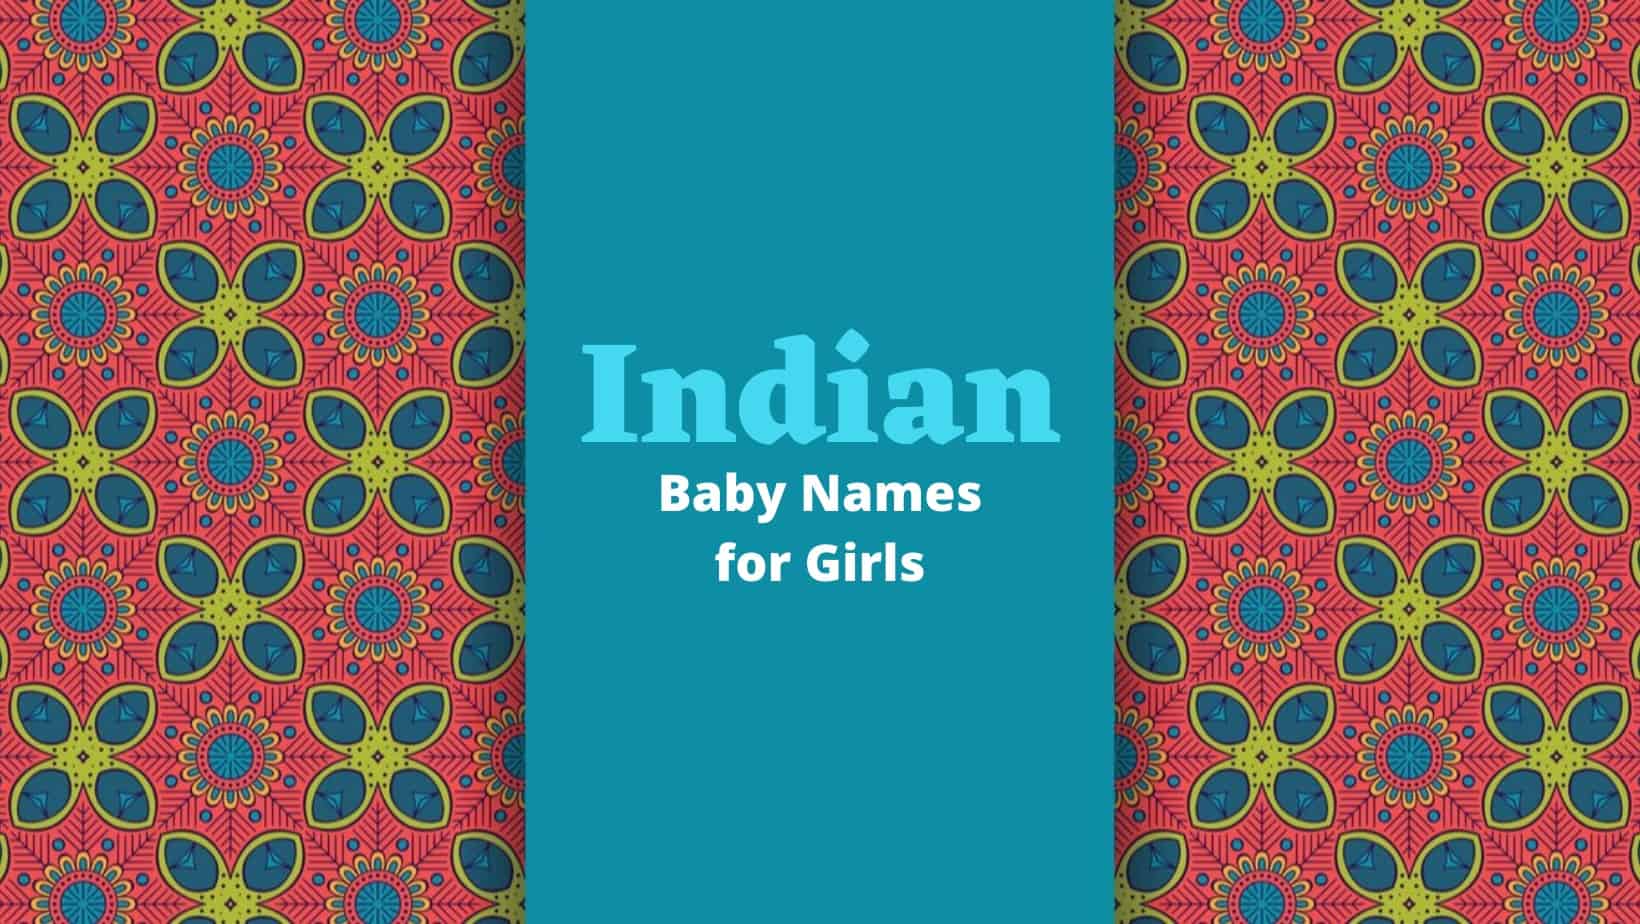 Indian Baby Names for Girls